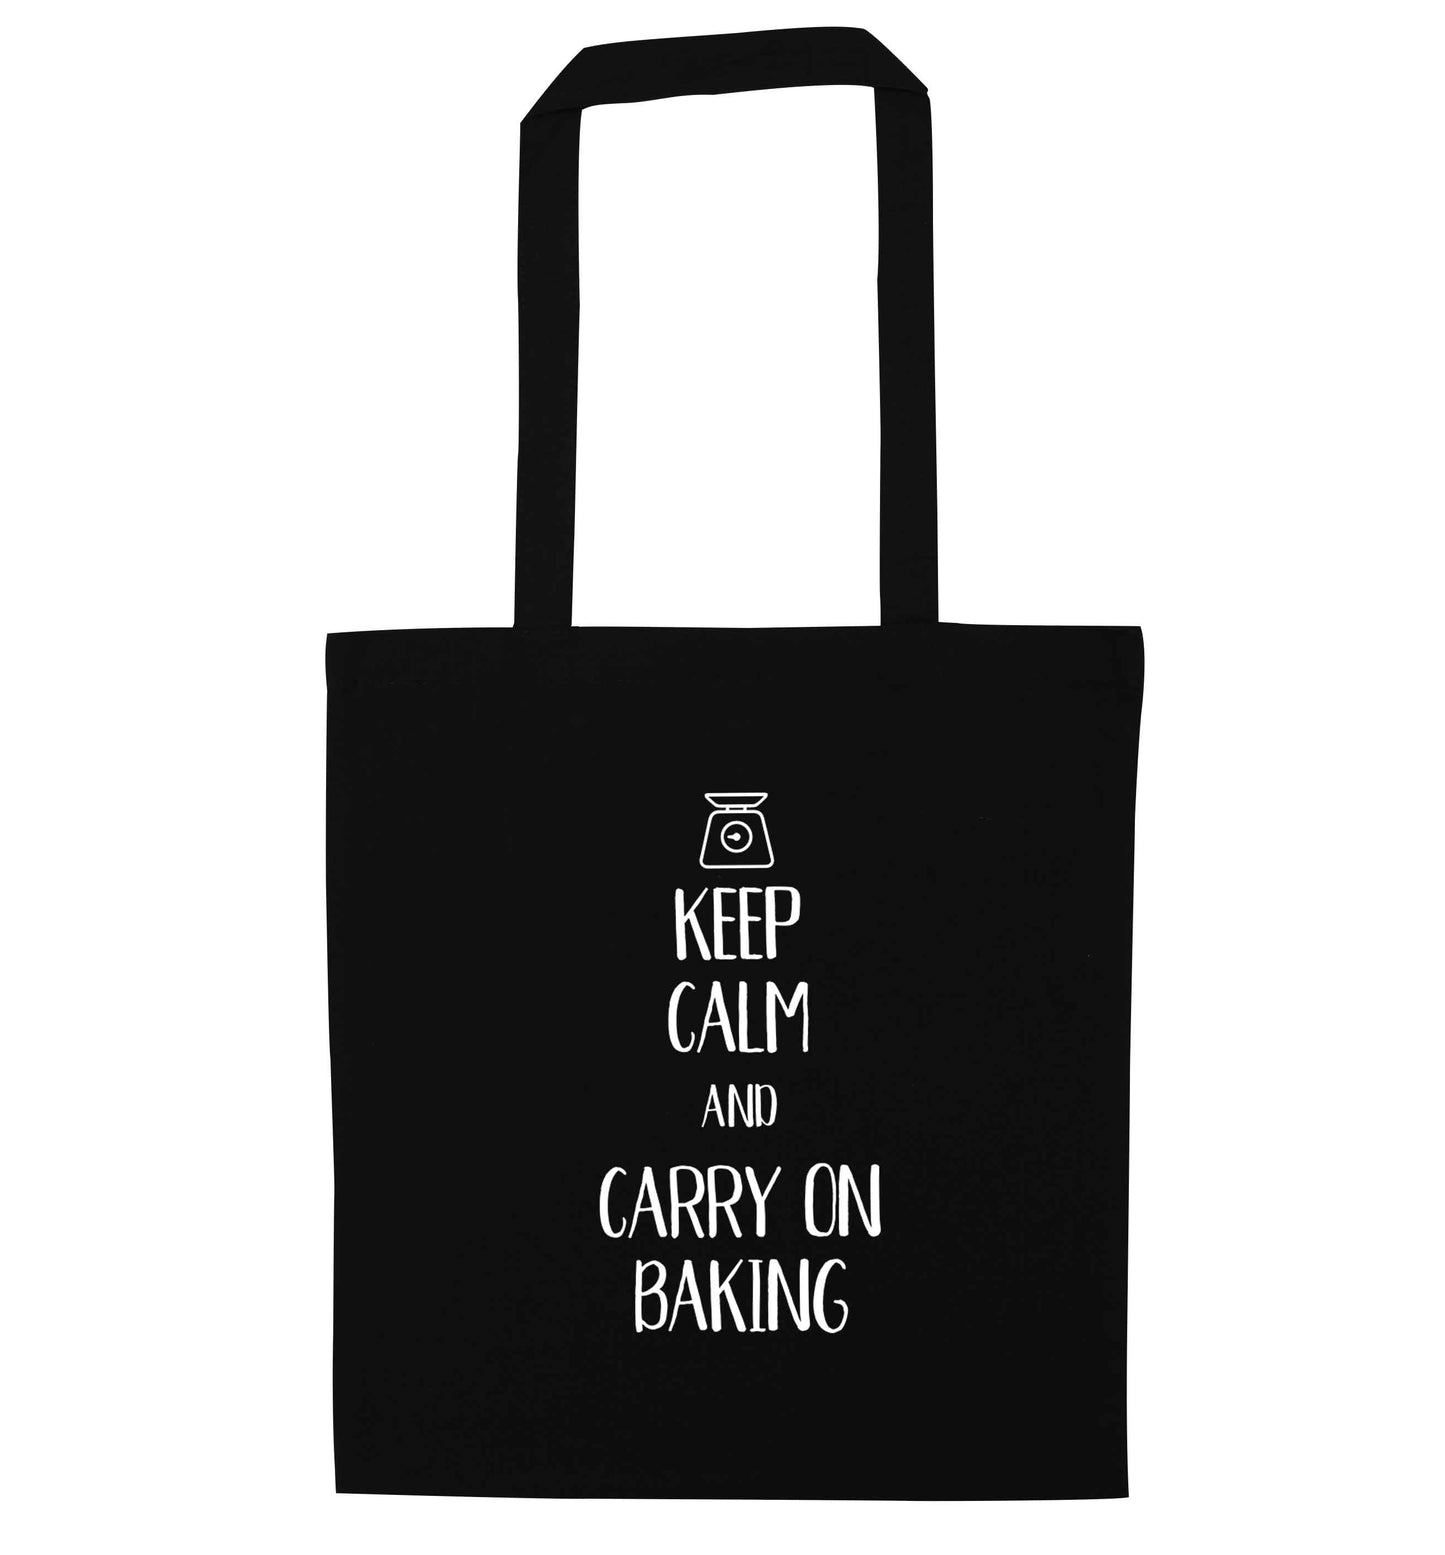 Keep calm and carry on baking black tote bag